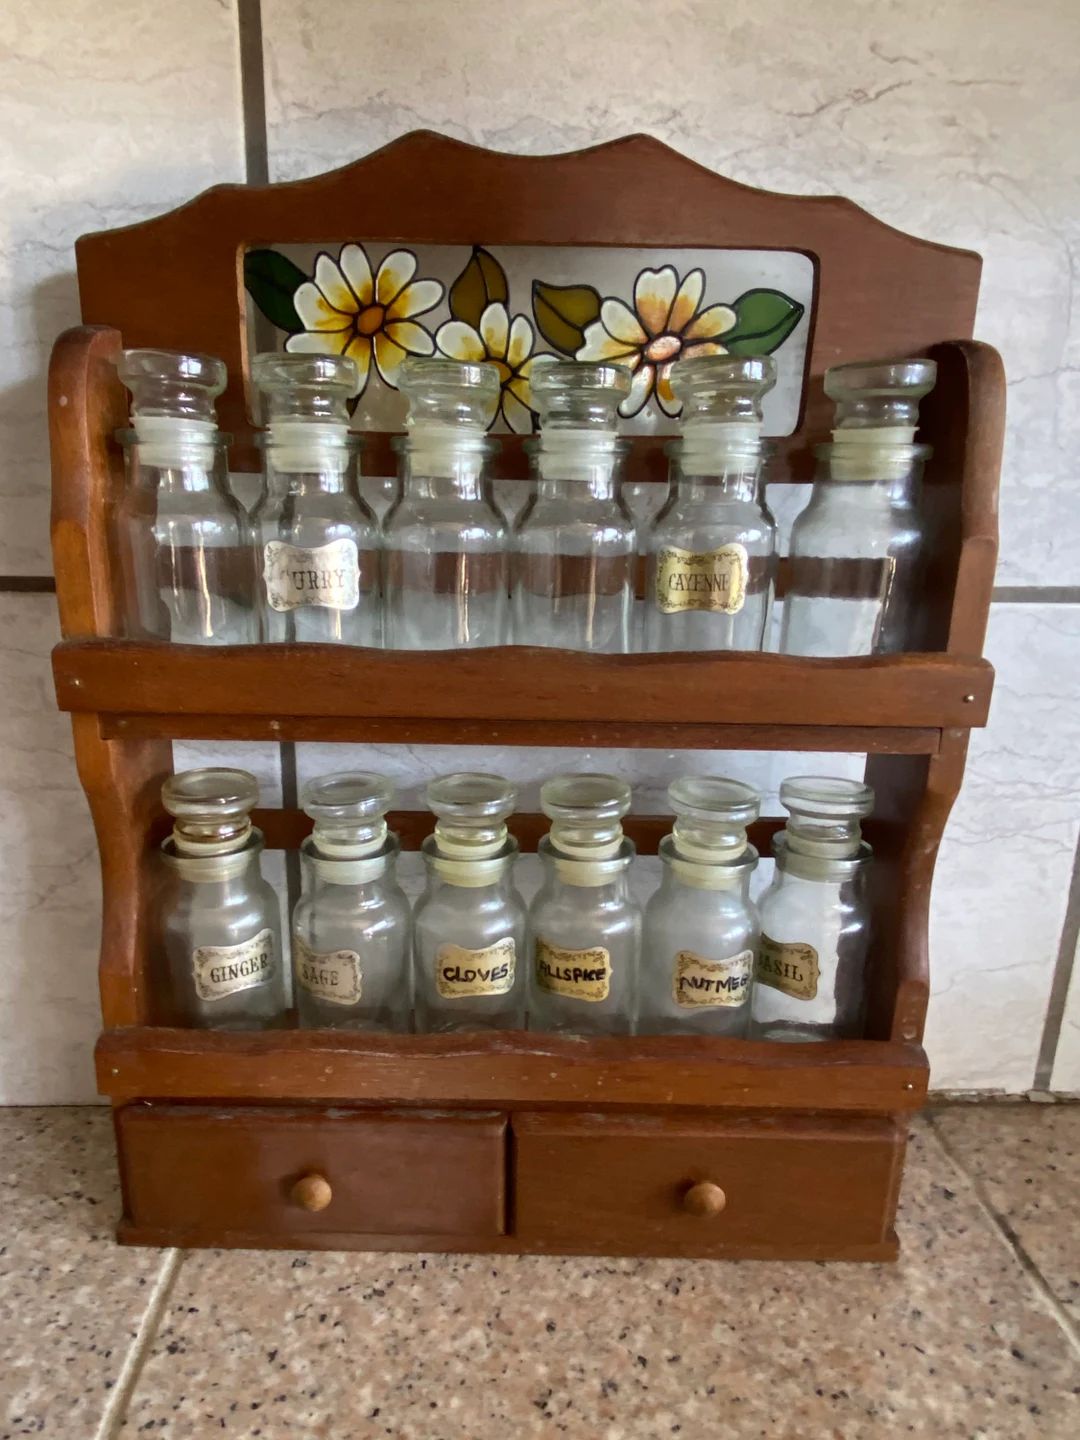 Retro Spice Rack With 12 Glass Bottles in Original Box Pretty Floral Daisy Detail Decor 70s Kitsc... | Etsy (CAD)